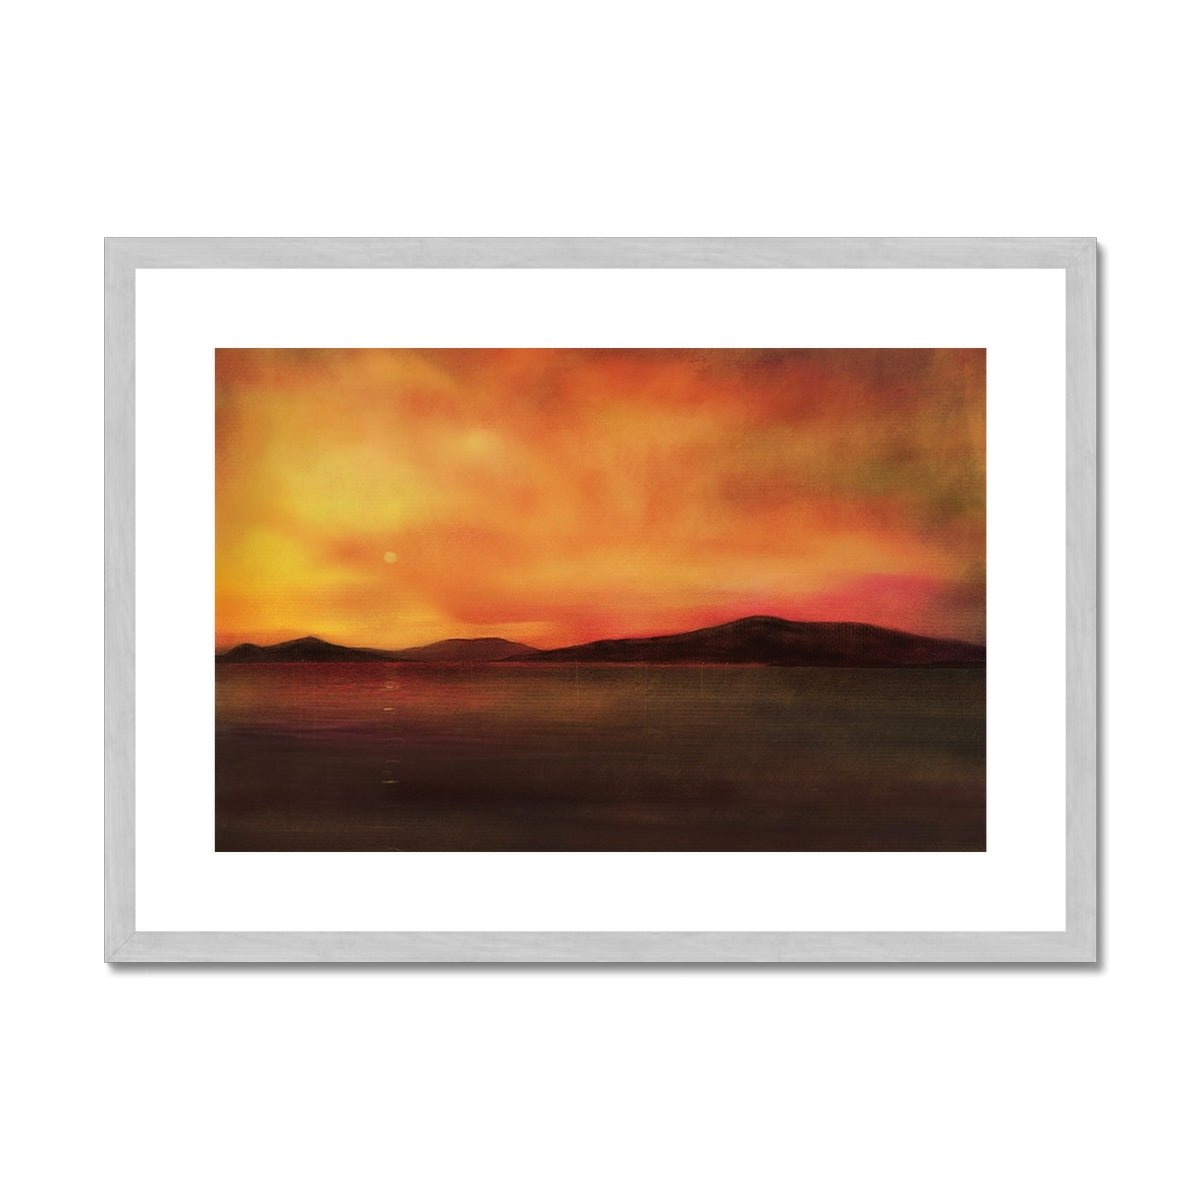 Isle Of Harris Sunset Painting | Antique Framed & Mounted Prints From Scotland-Antique Framed & Mounted Prints-Hebridean Islands Art Gallery-A2 Landscape-Silver Frame-Paintings, Prints, Homeware, Art Gifts From Scotland By Scottish Artist Kevin Hunter